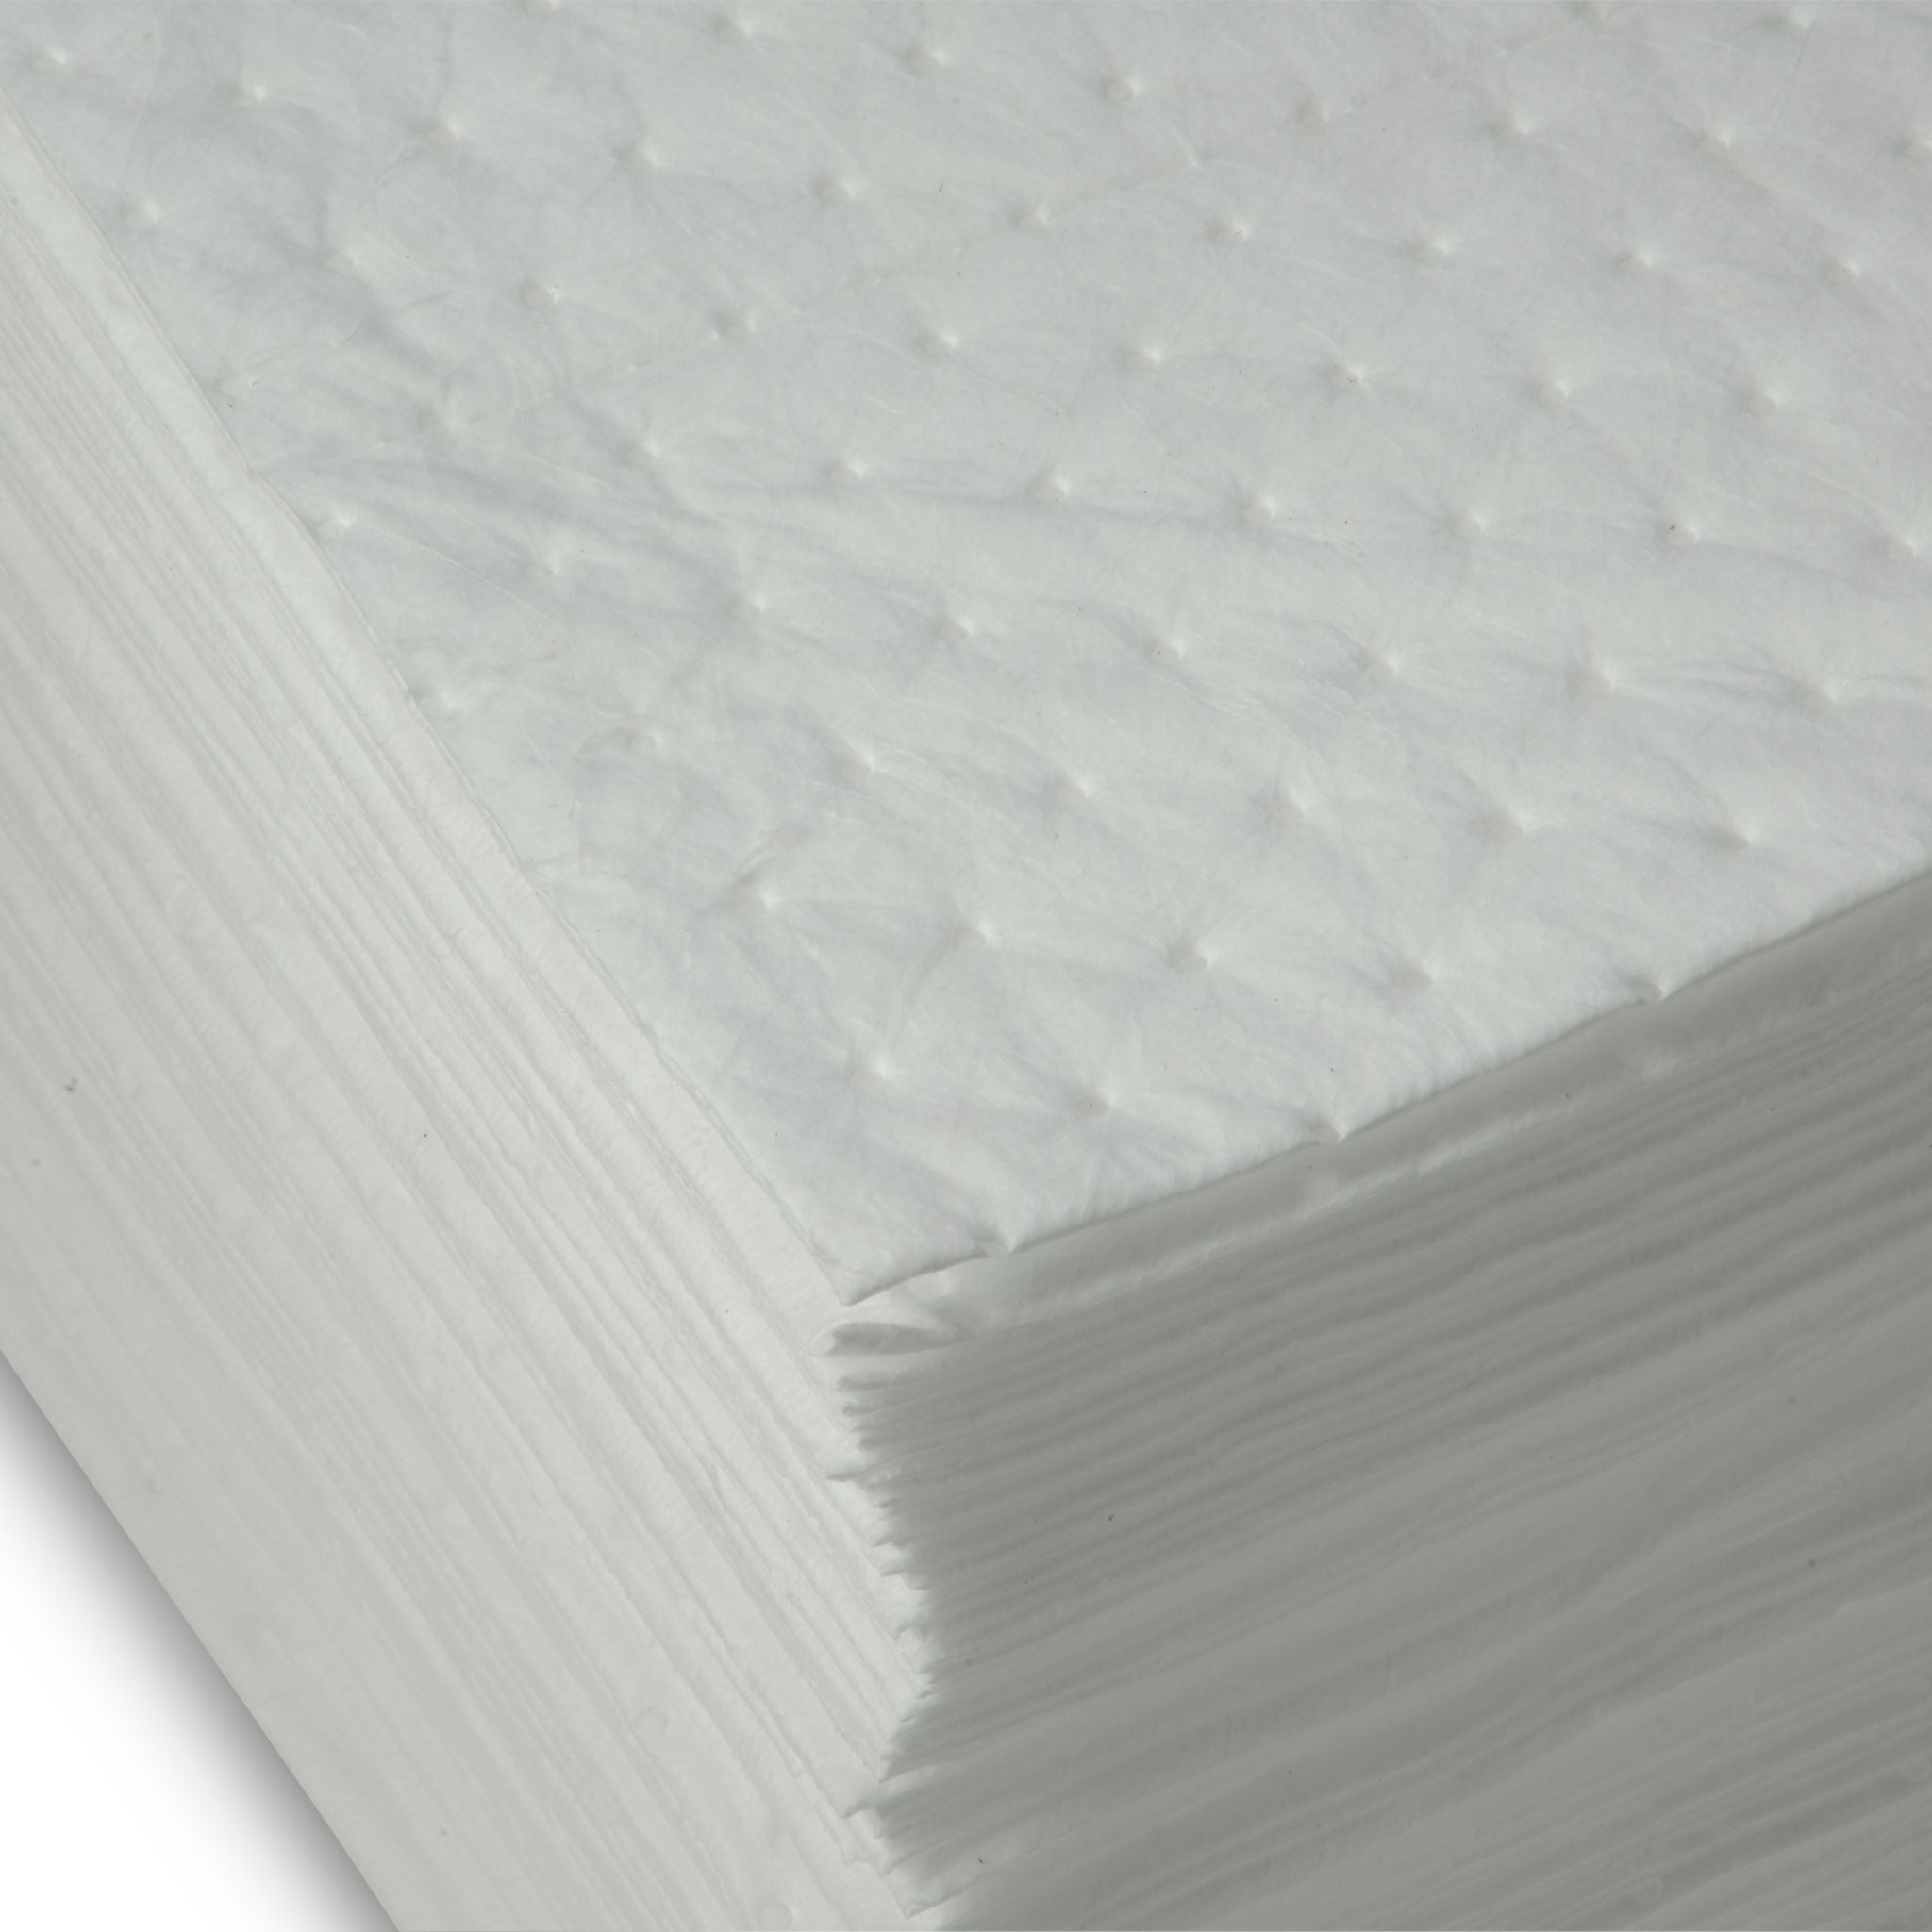 AABACO Oil ONLY White Absorbent Pads - Dimpled HEAVY Weight Pads